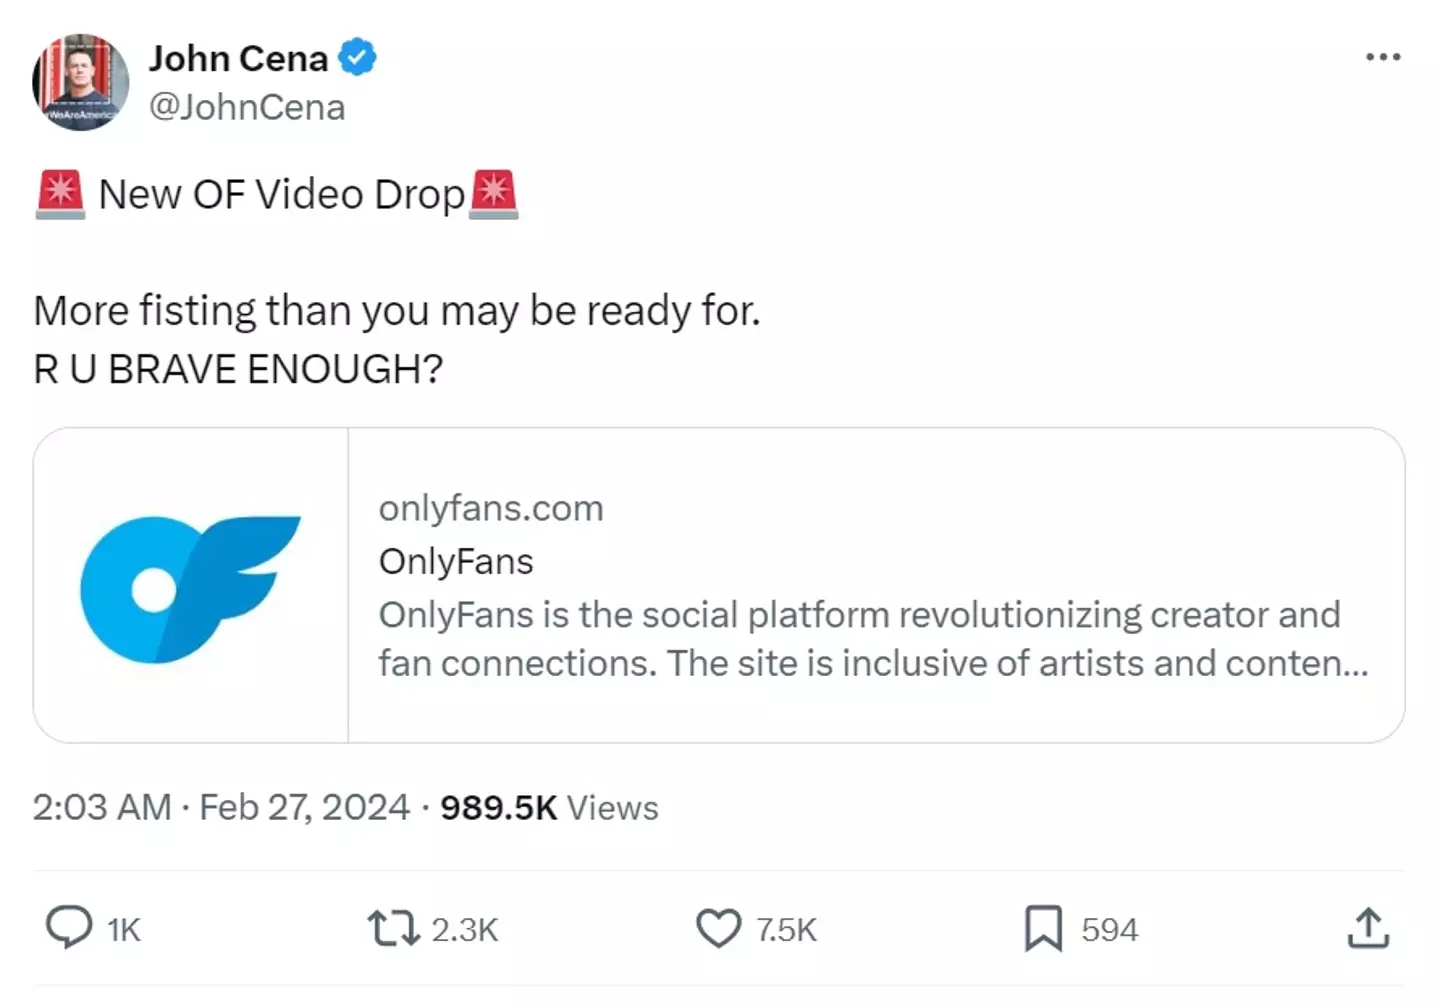 Yup, that's John Cena plugging his OnlyFans...